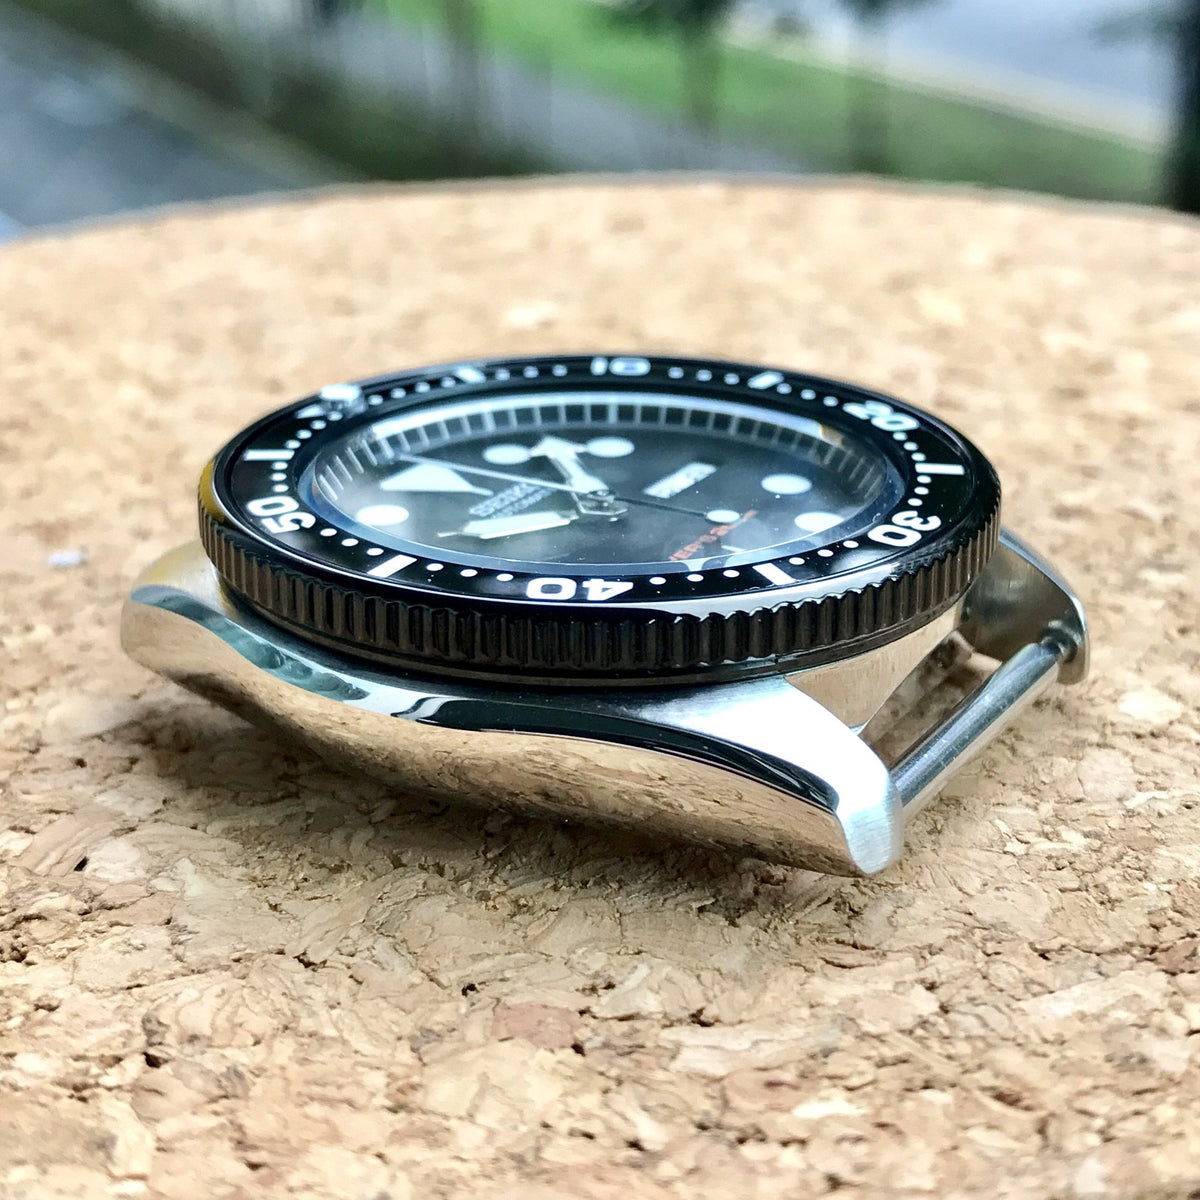 Bezel - SKX007/SRPD Coin Edge - Polished PVD Black - DLW WATCHES